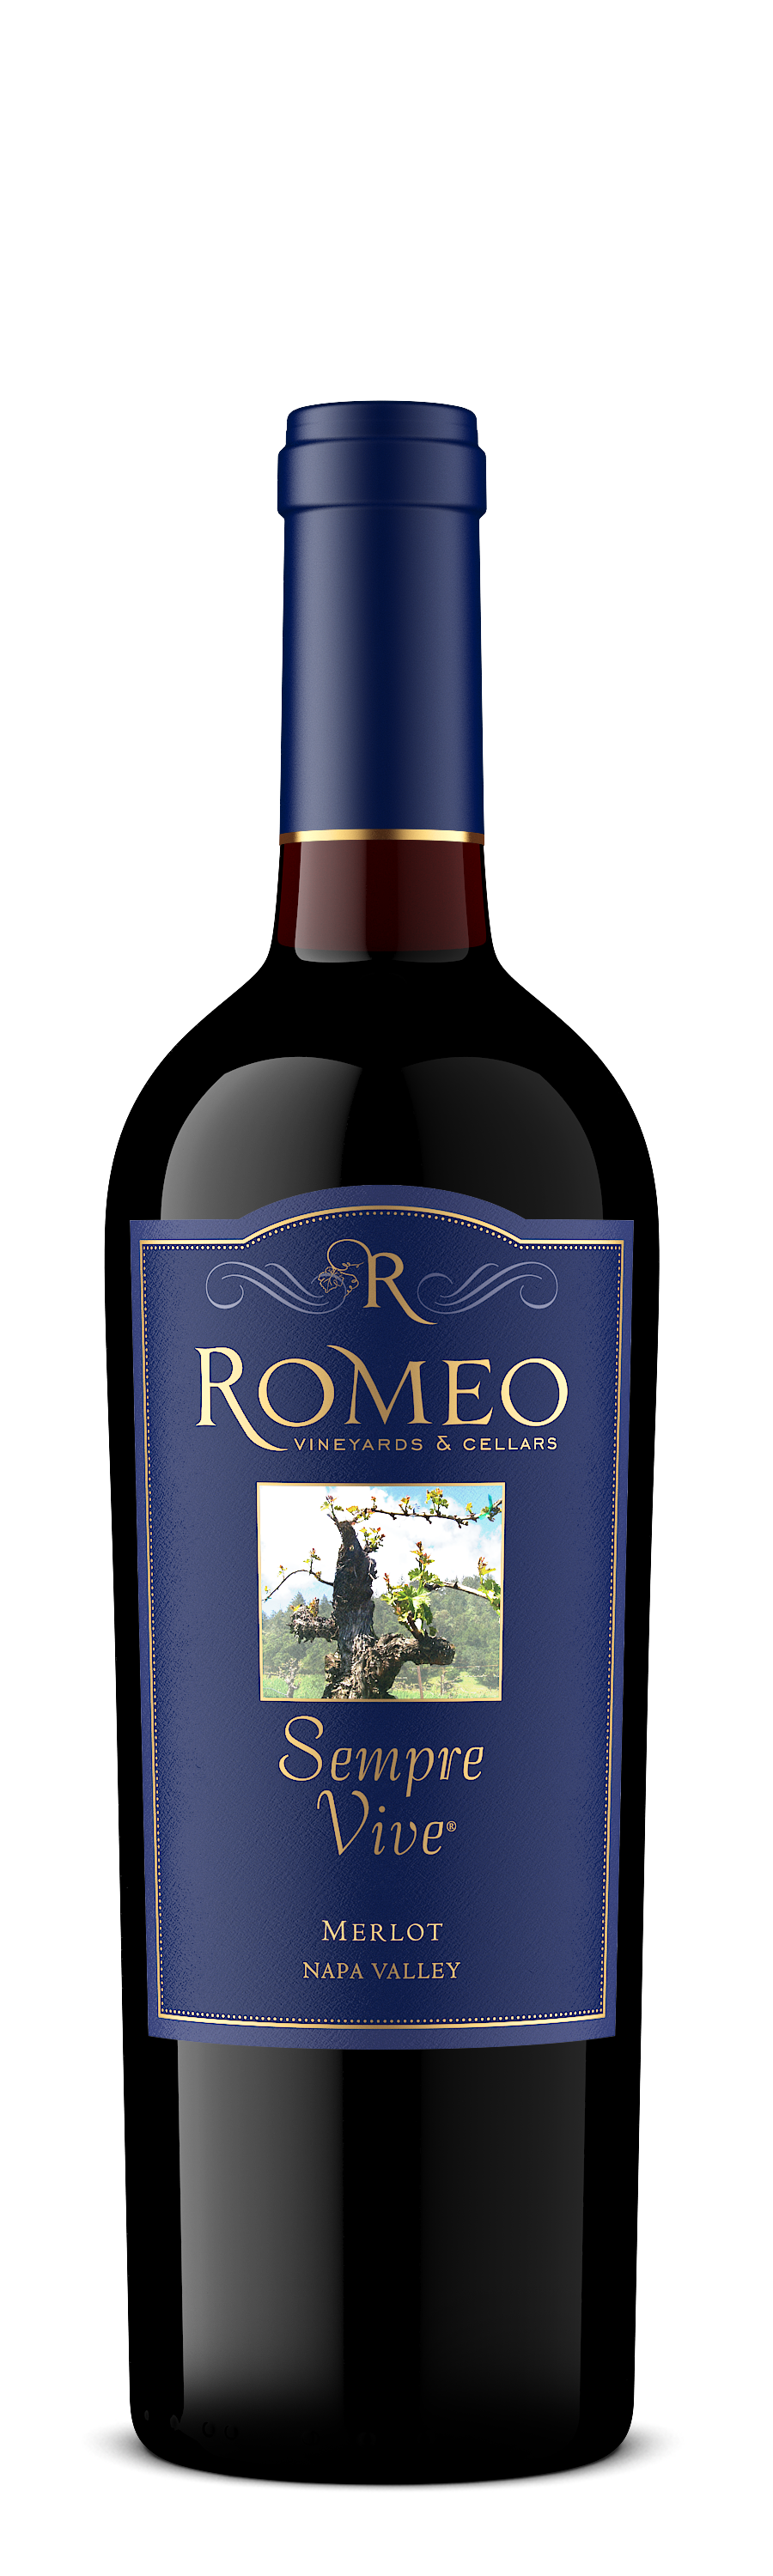 Product Image for 2016 Merlot